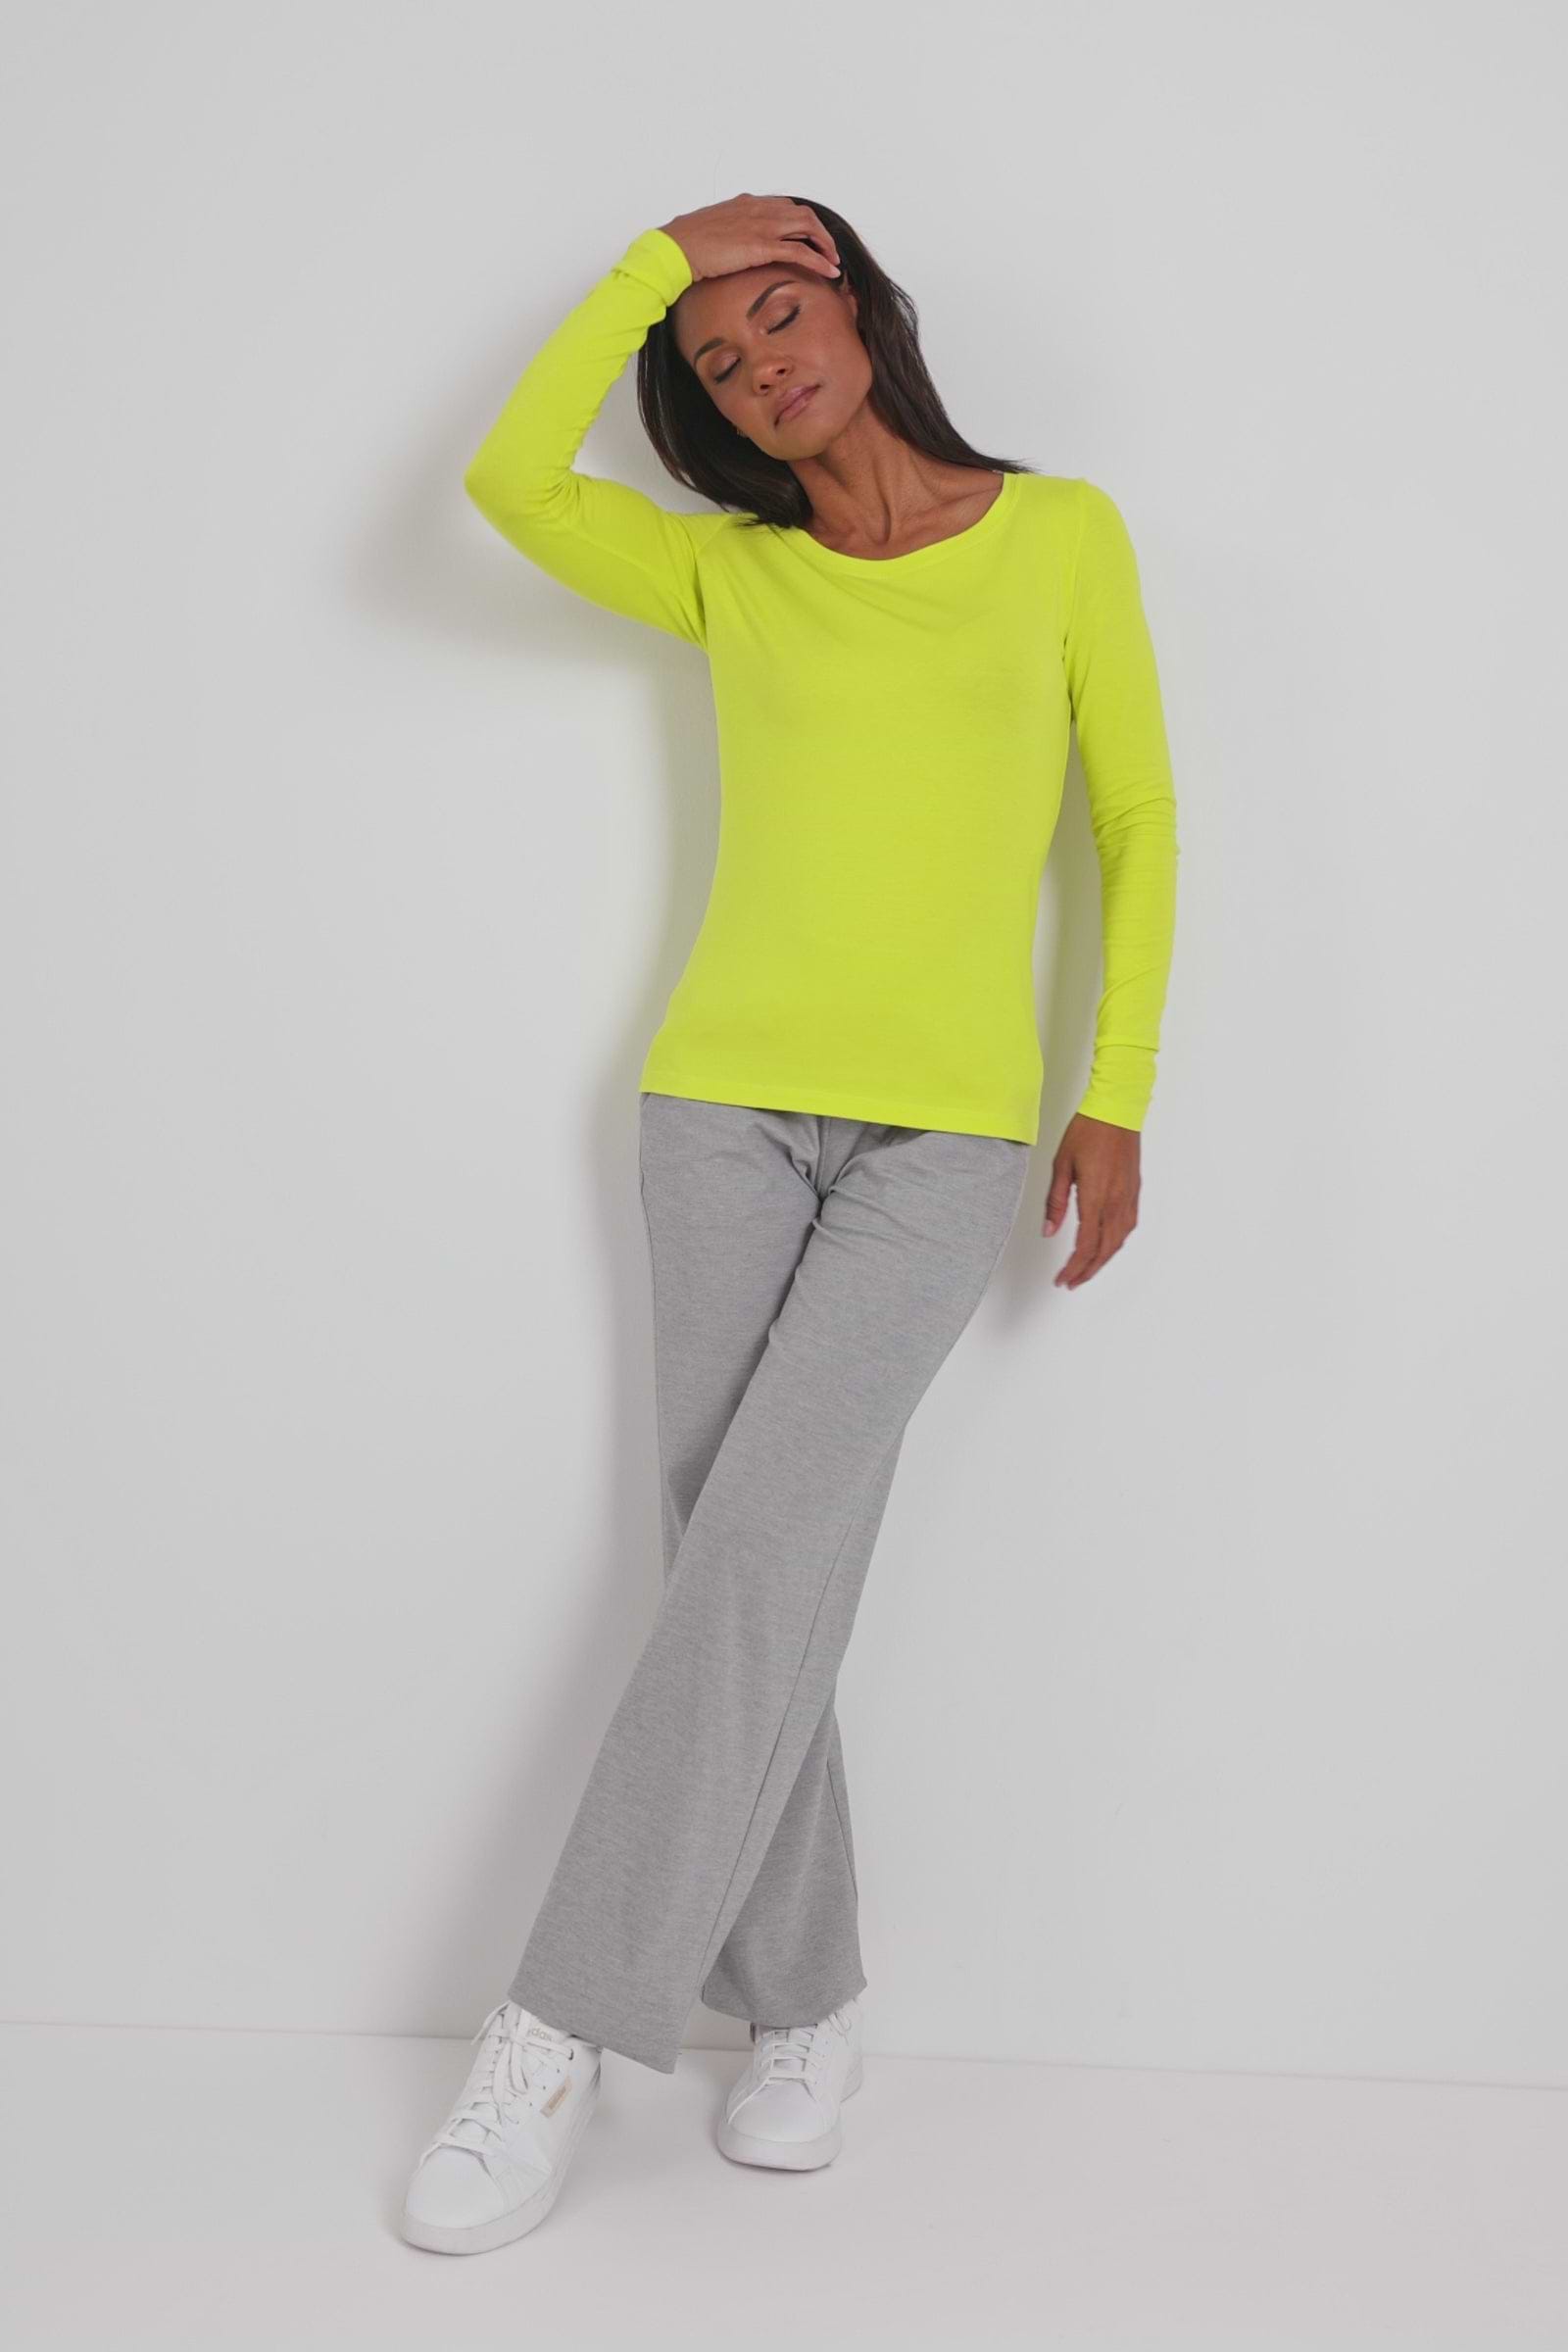 Video of a Juliana Top in Citrus Yellow.